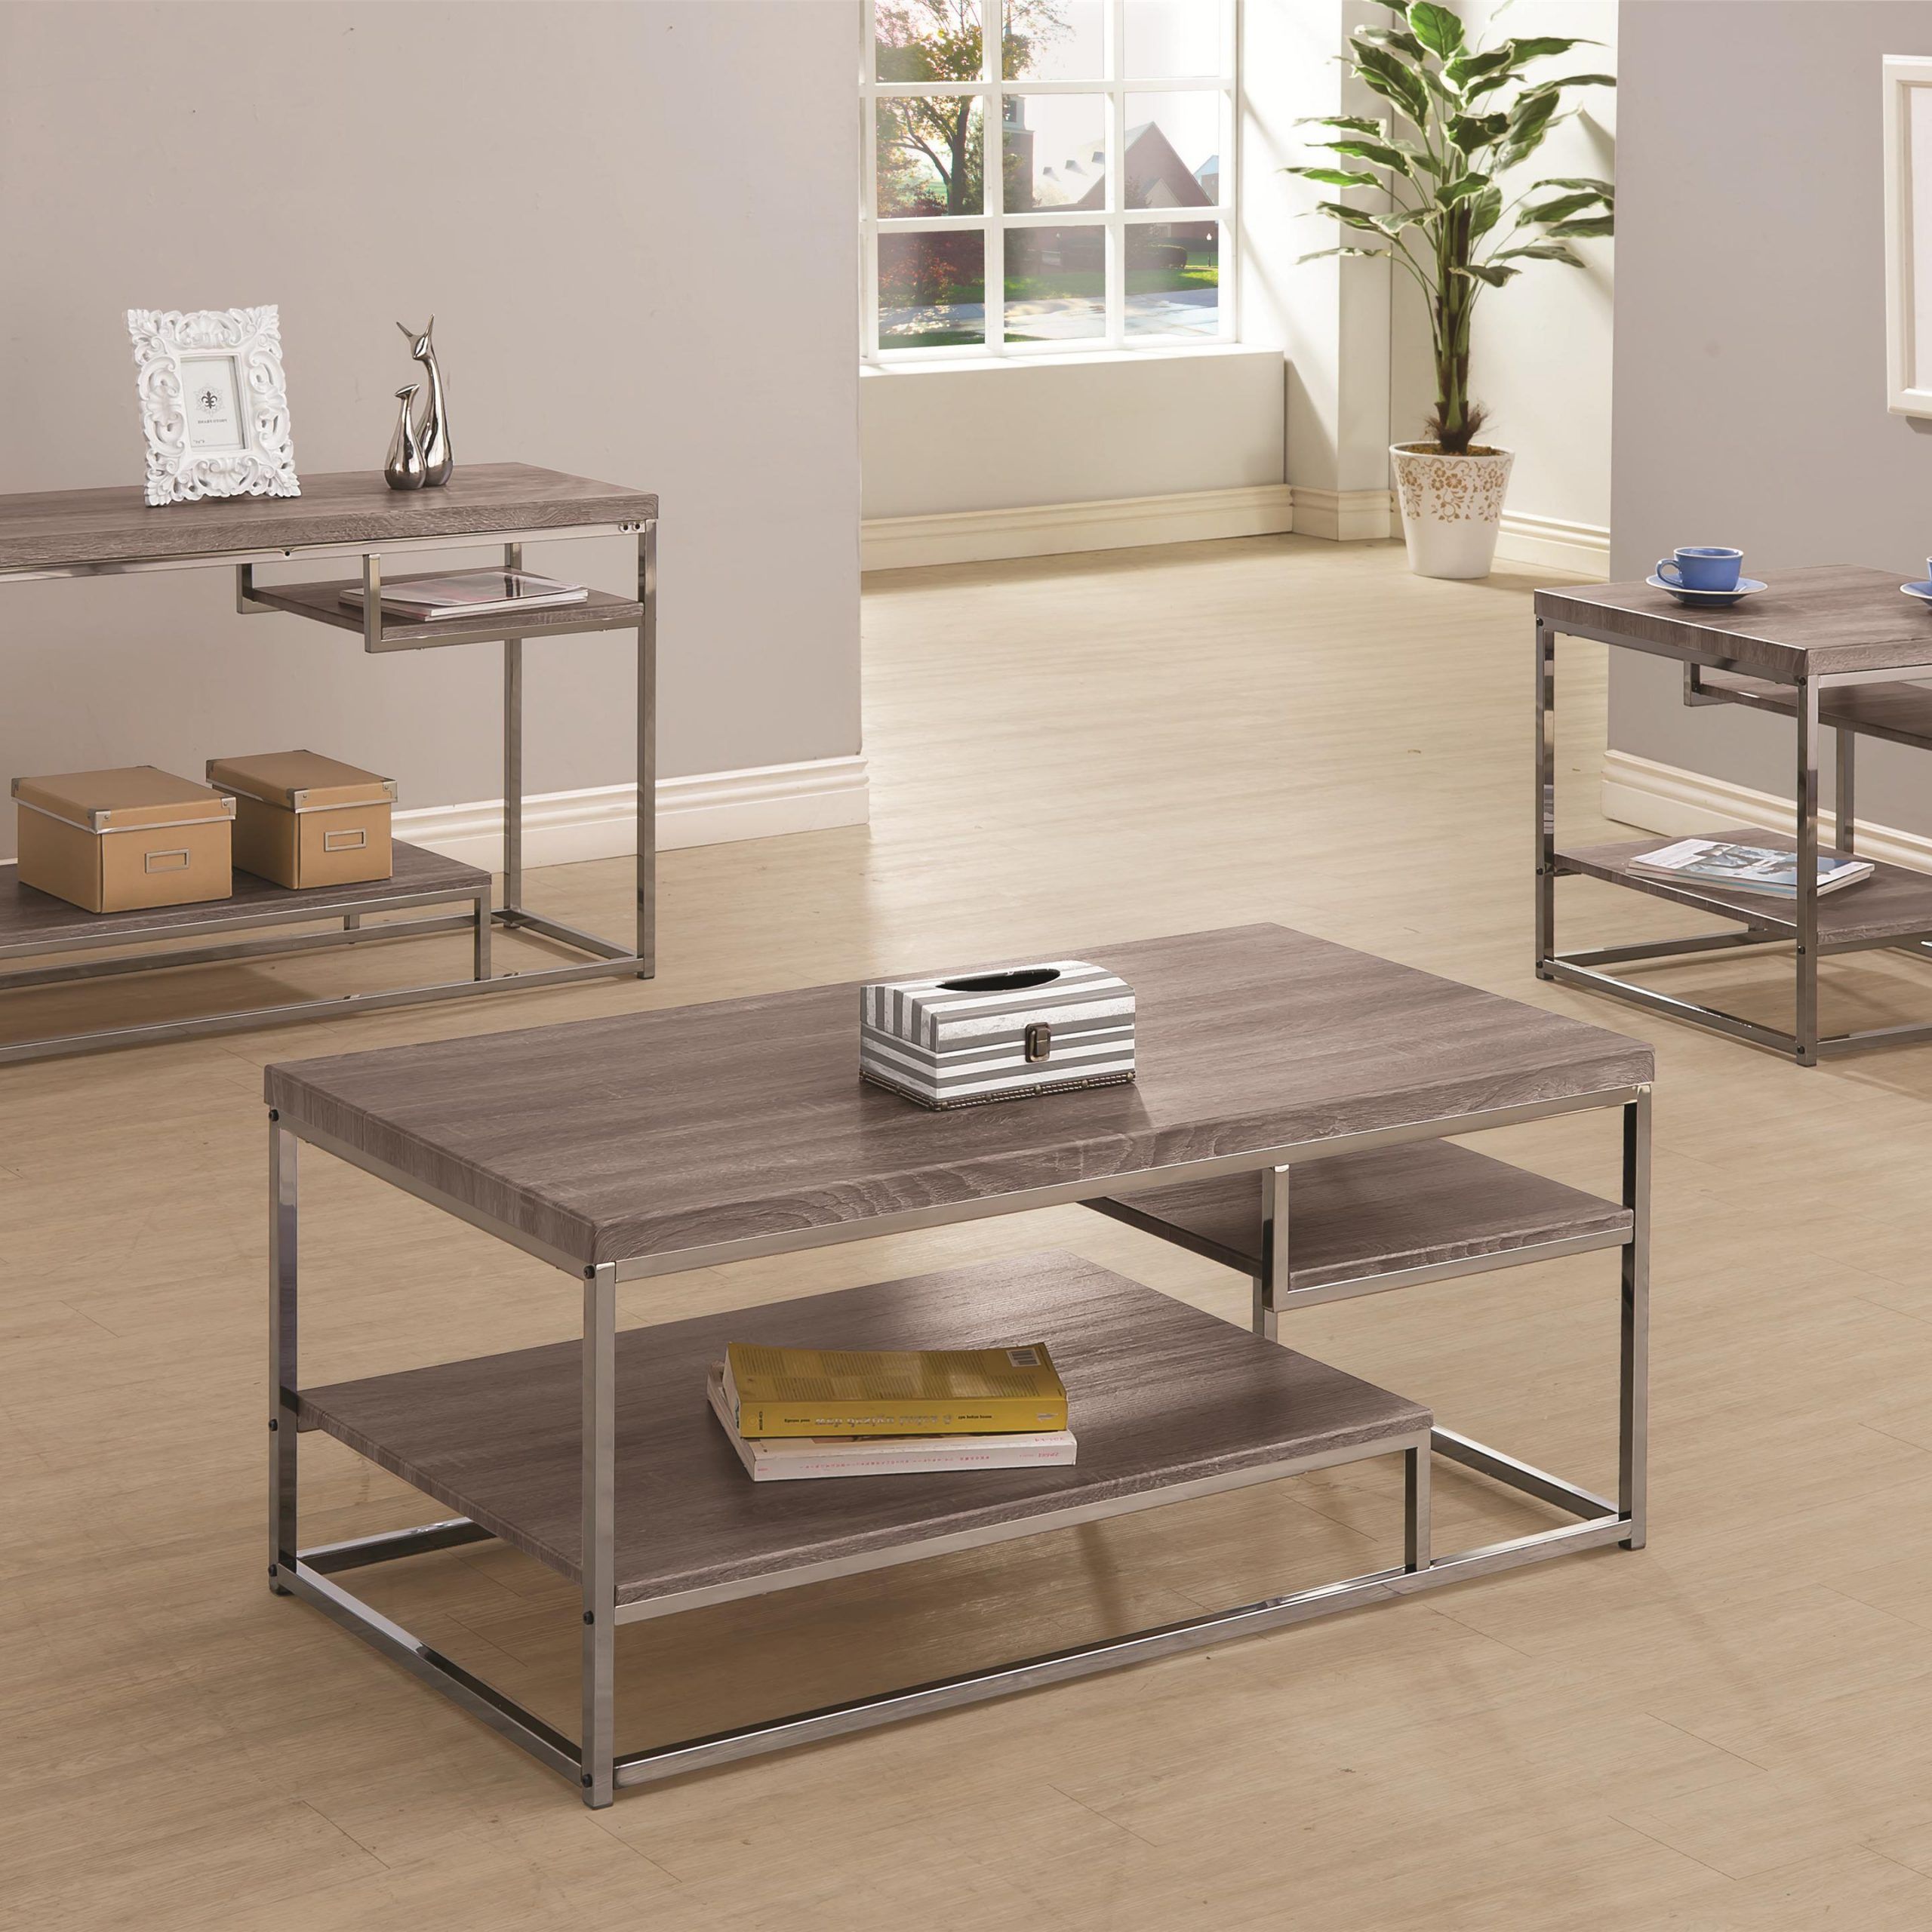 Favorite Coaster 7037 2 Shelf Coffee Table With Wood Top And Chrome Regarding 2 Shelf Coffee Tables (View 17 of 20)